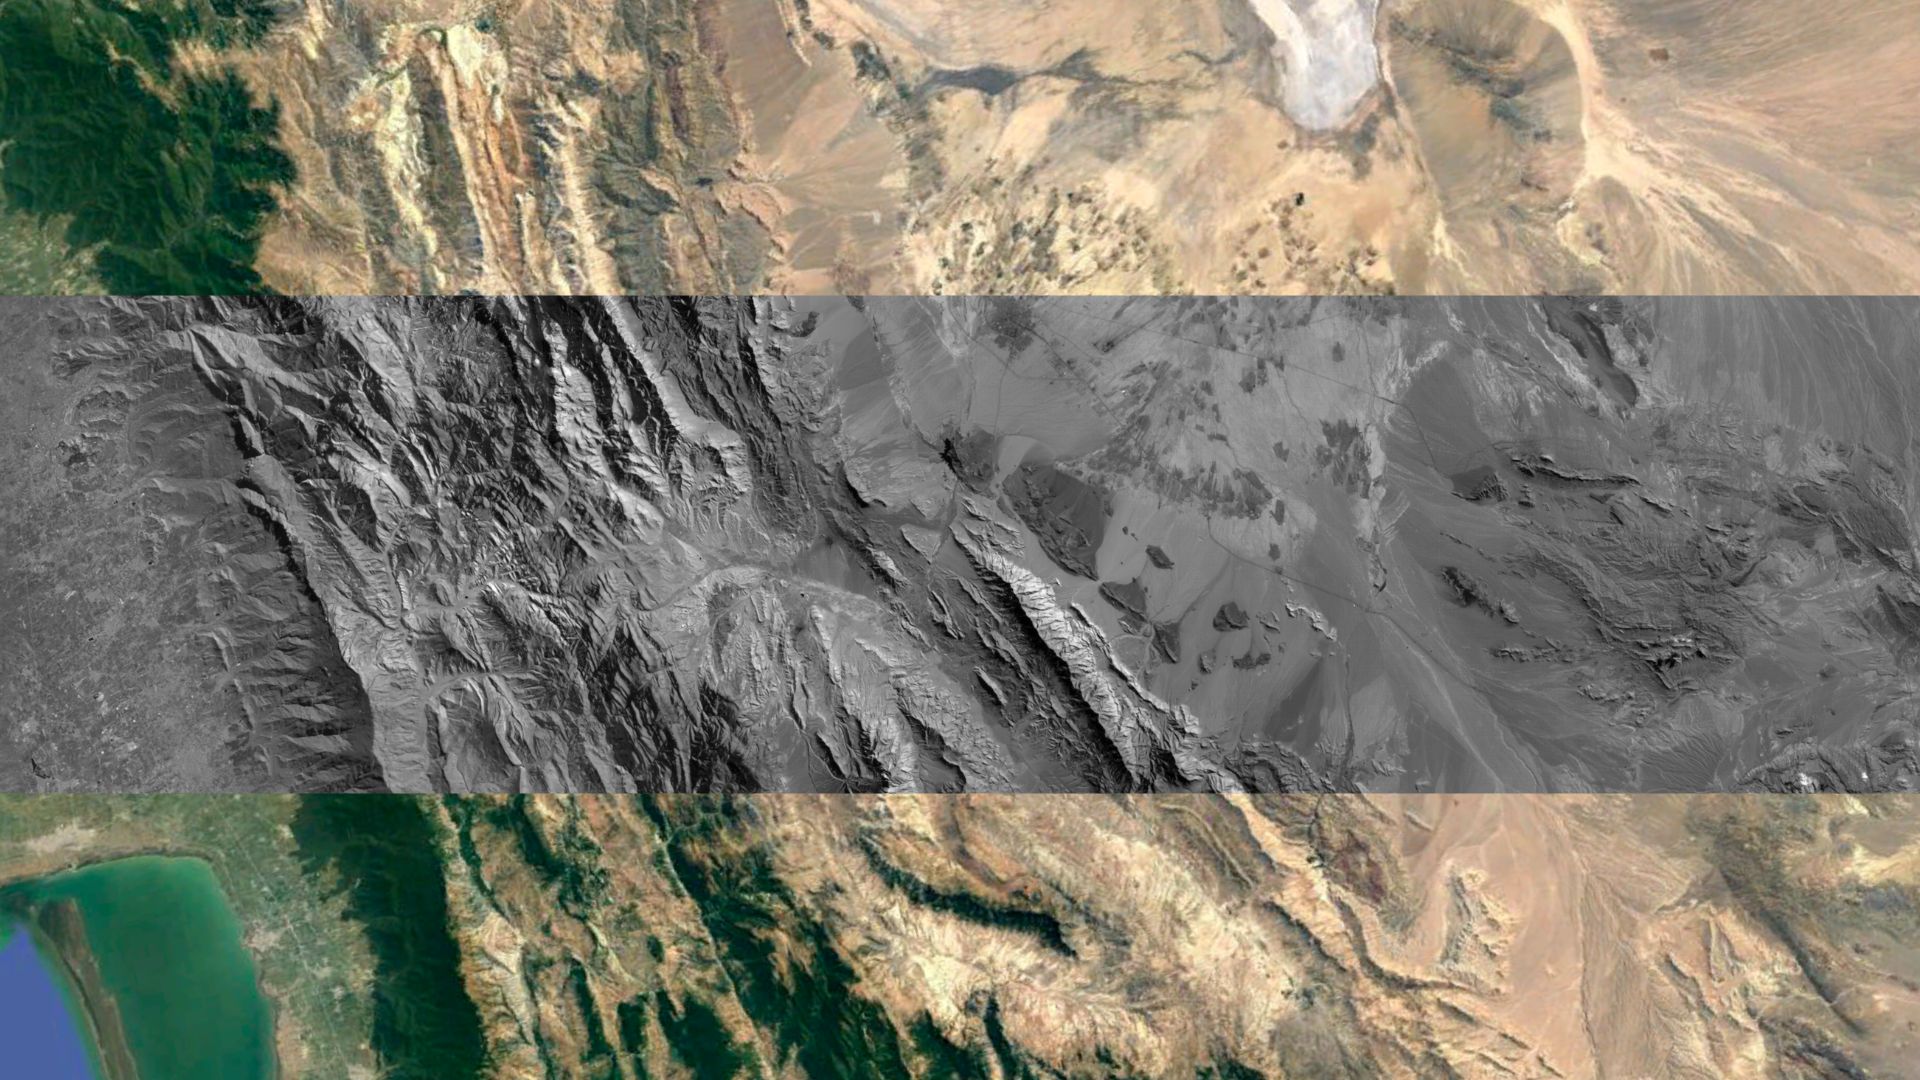 Mountains in the south of Turkmenistan, observed with DRAG=-2. The image has been superposed on images from the Landsat satellite. Credit: IACTEC